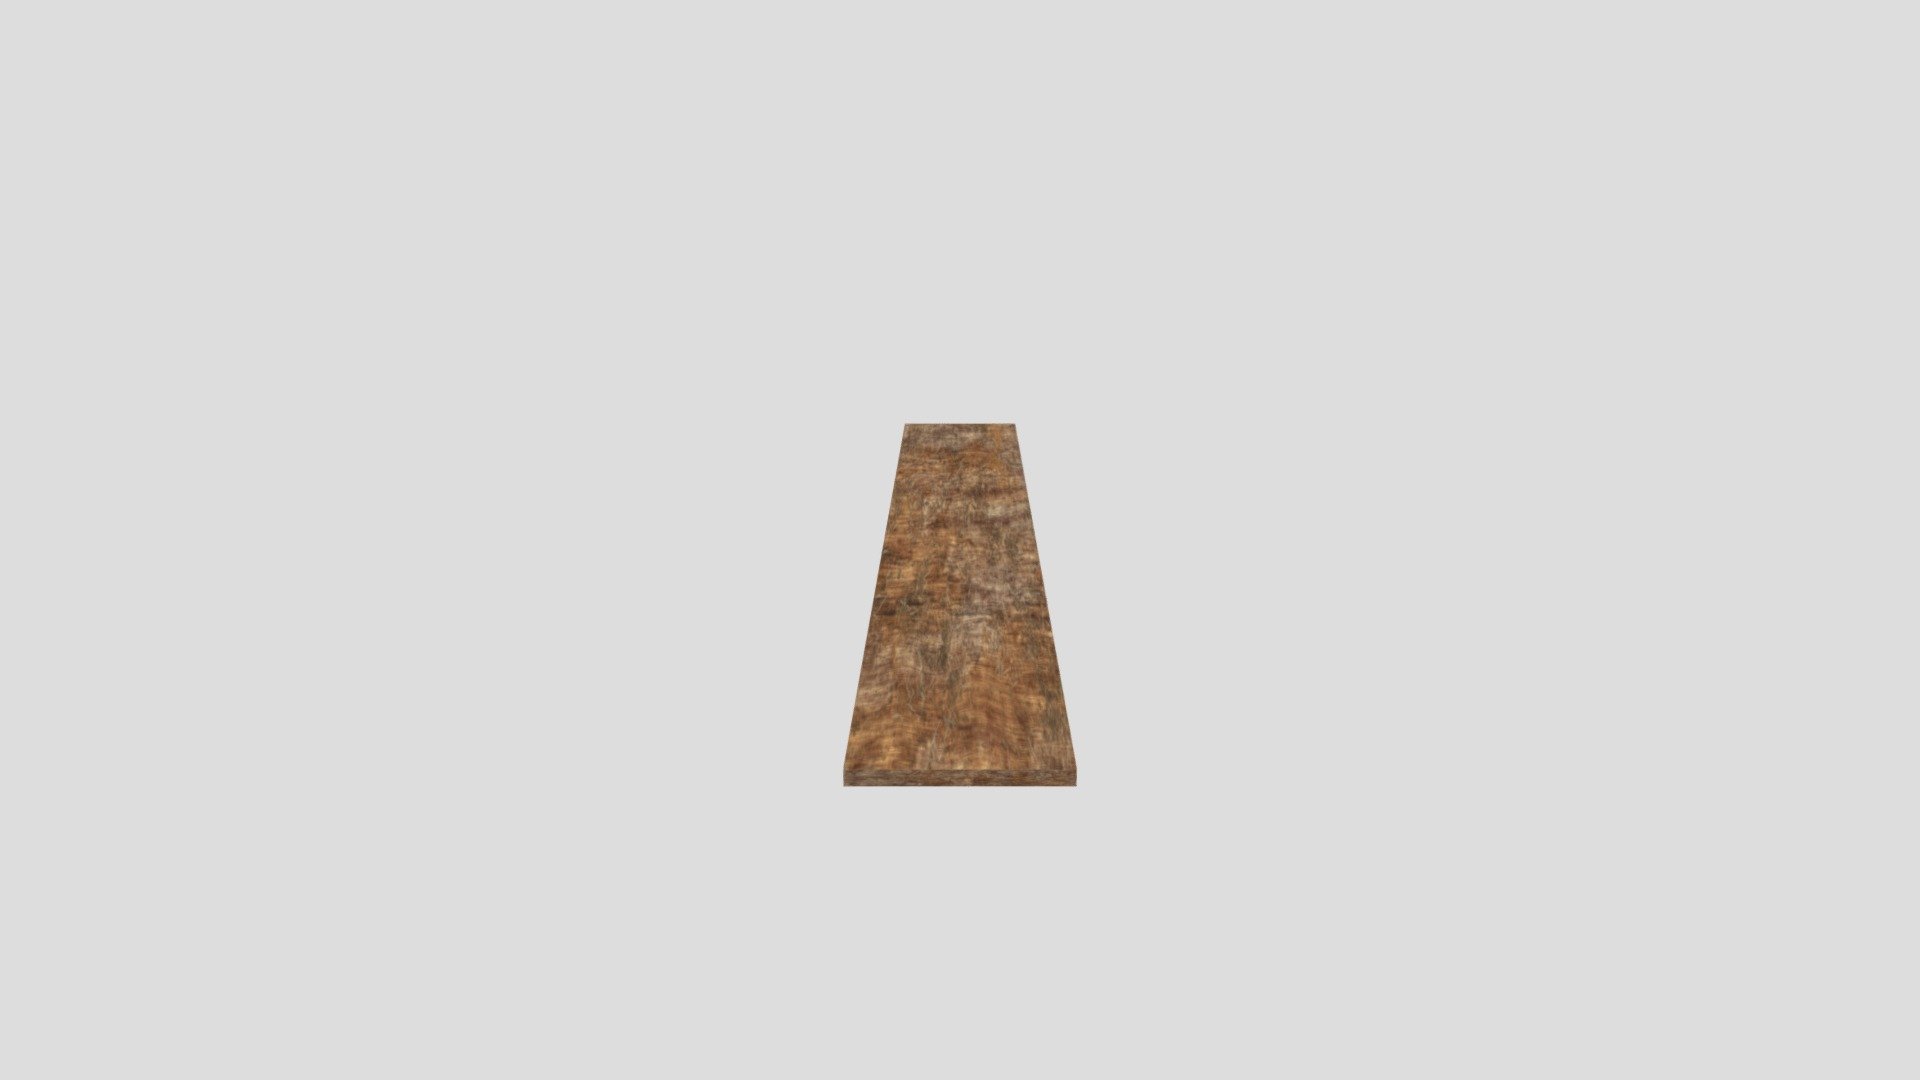 This is just a wooden plank with materials and textures 3d model